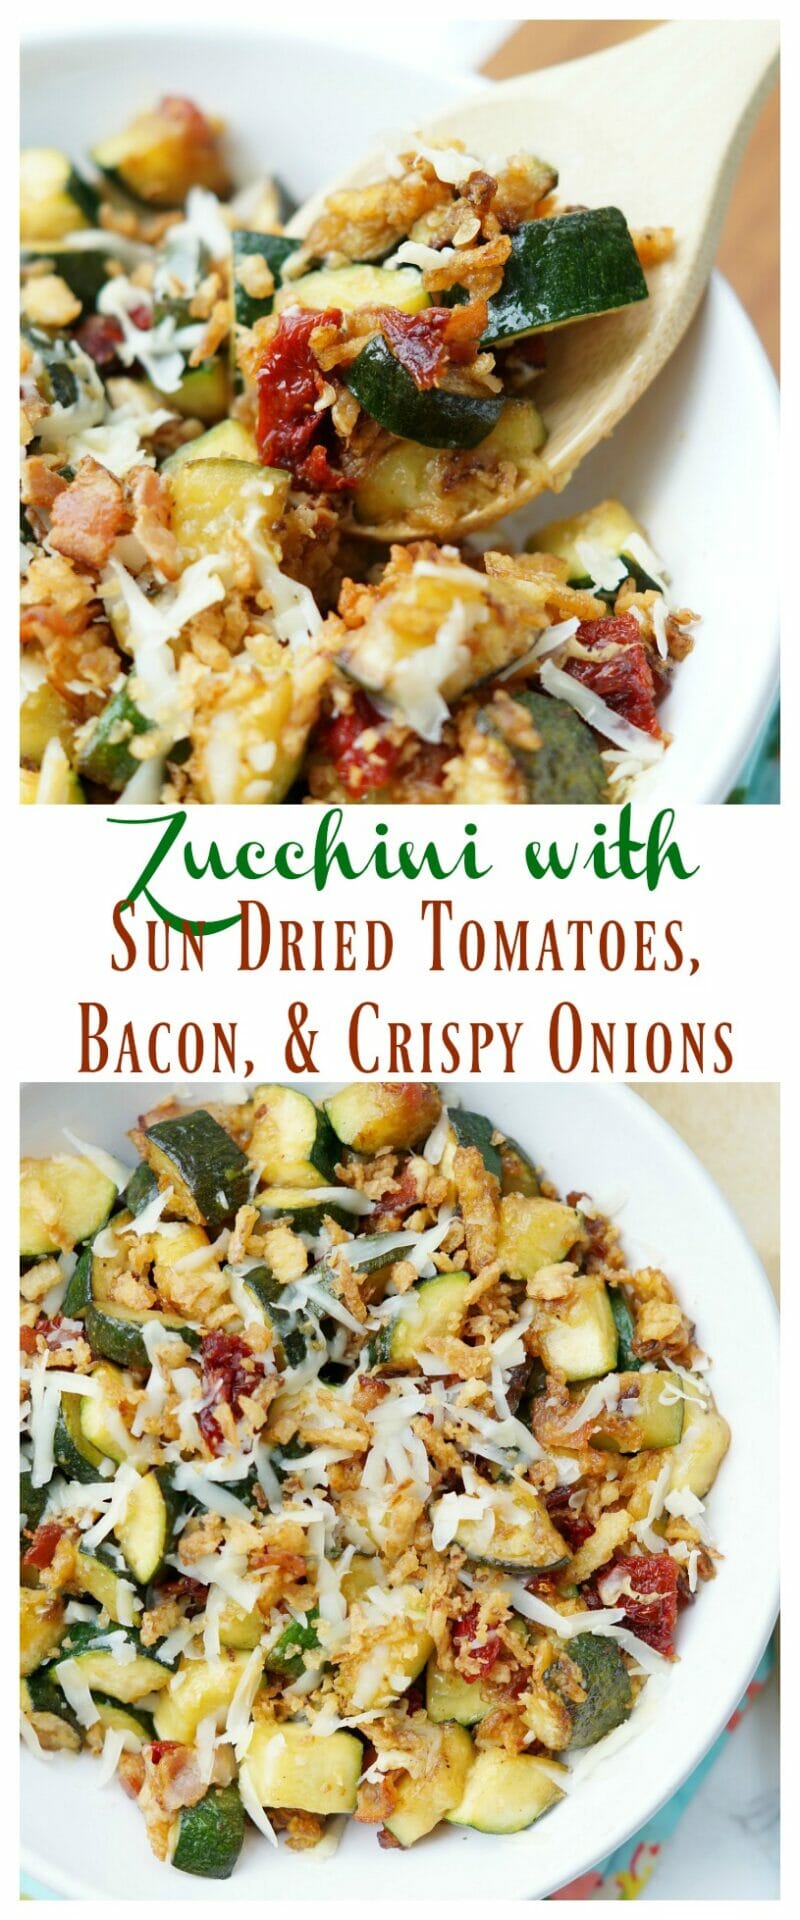 Zucchini with Sun Dried Tomatoes, Bacon, and Crispy Onions. A delicious side dish perfect for summertime zucchini or any time of the year!